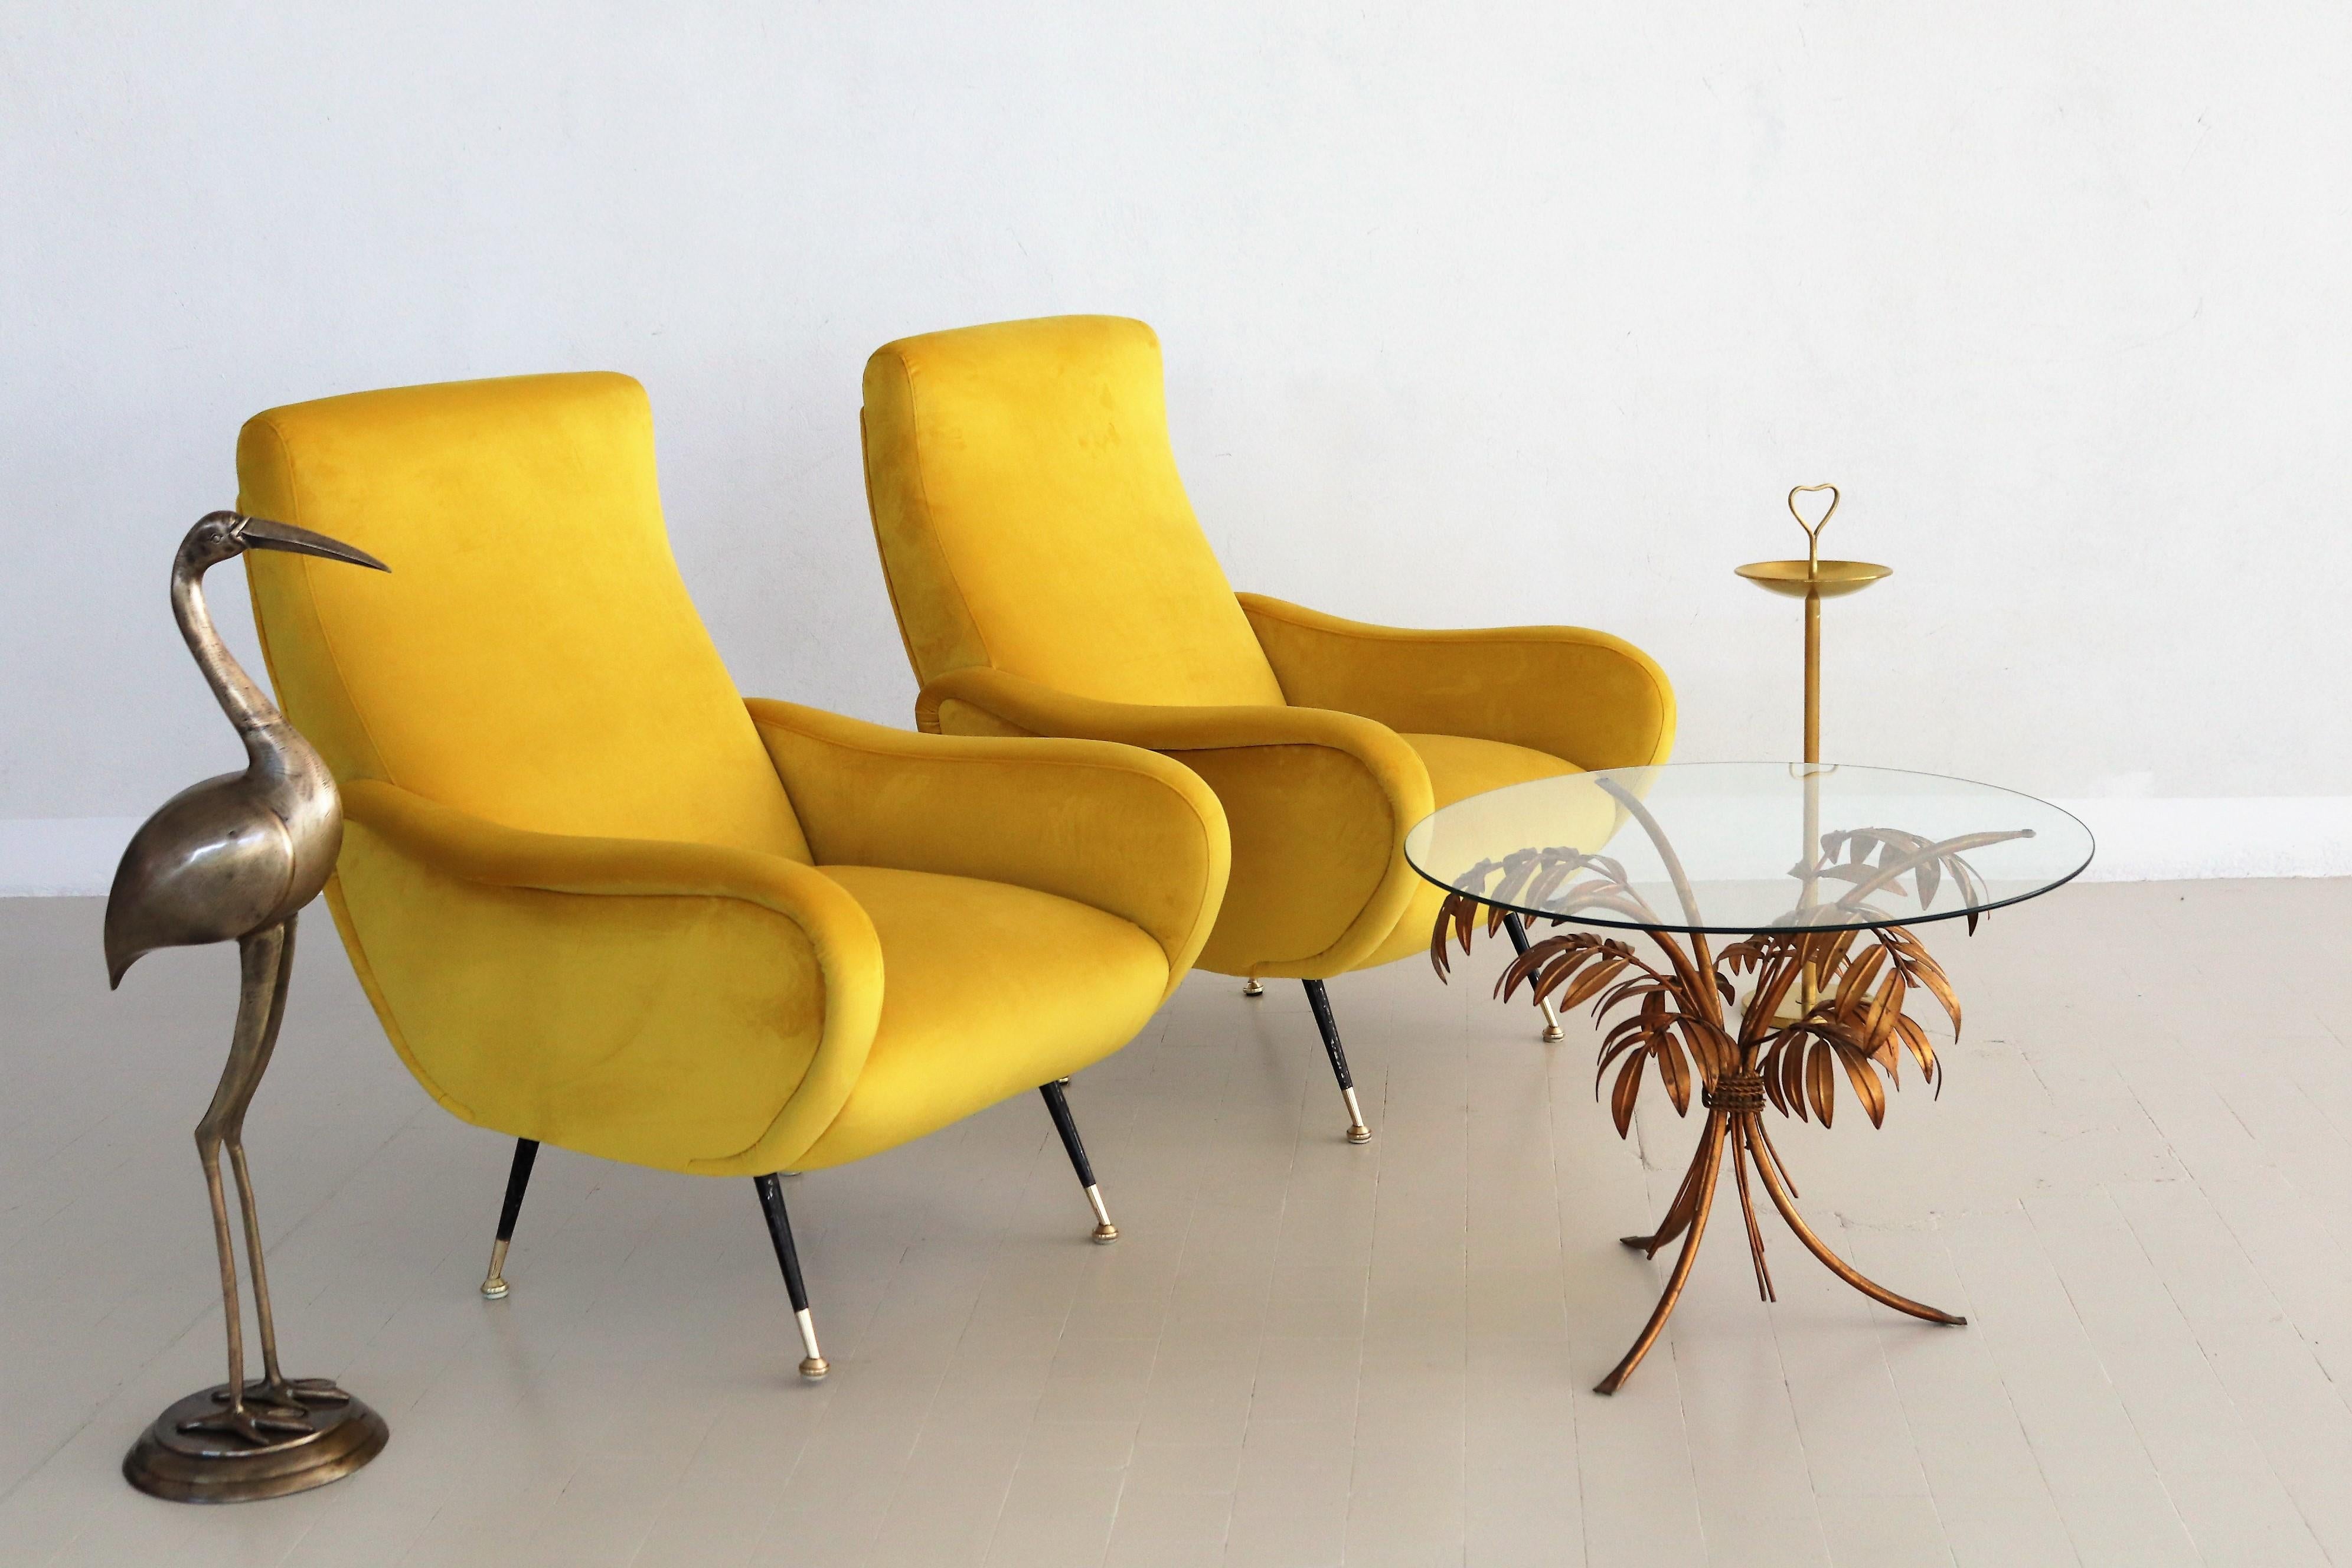 Gorgeous and colorful pair of two Italian original midcentury armchairs or lounge chairs from the 1950s with brass stiletto tips.
Completely restored internally with quality material and outside reupholstered with soft Italian velvet in sunny